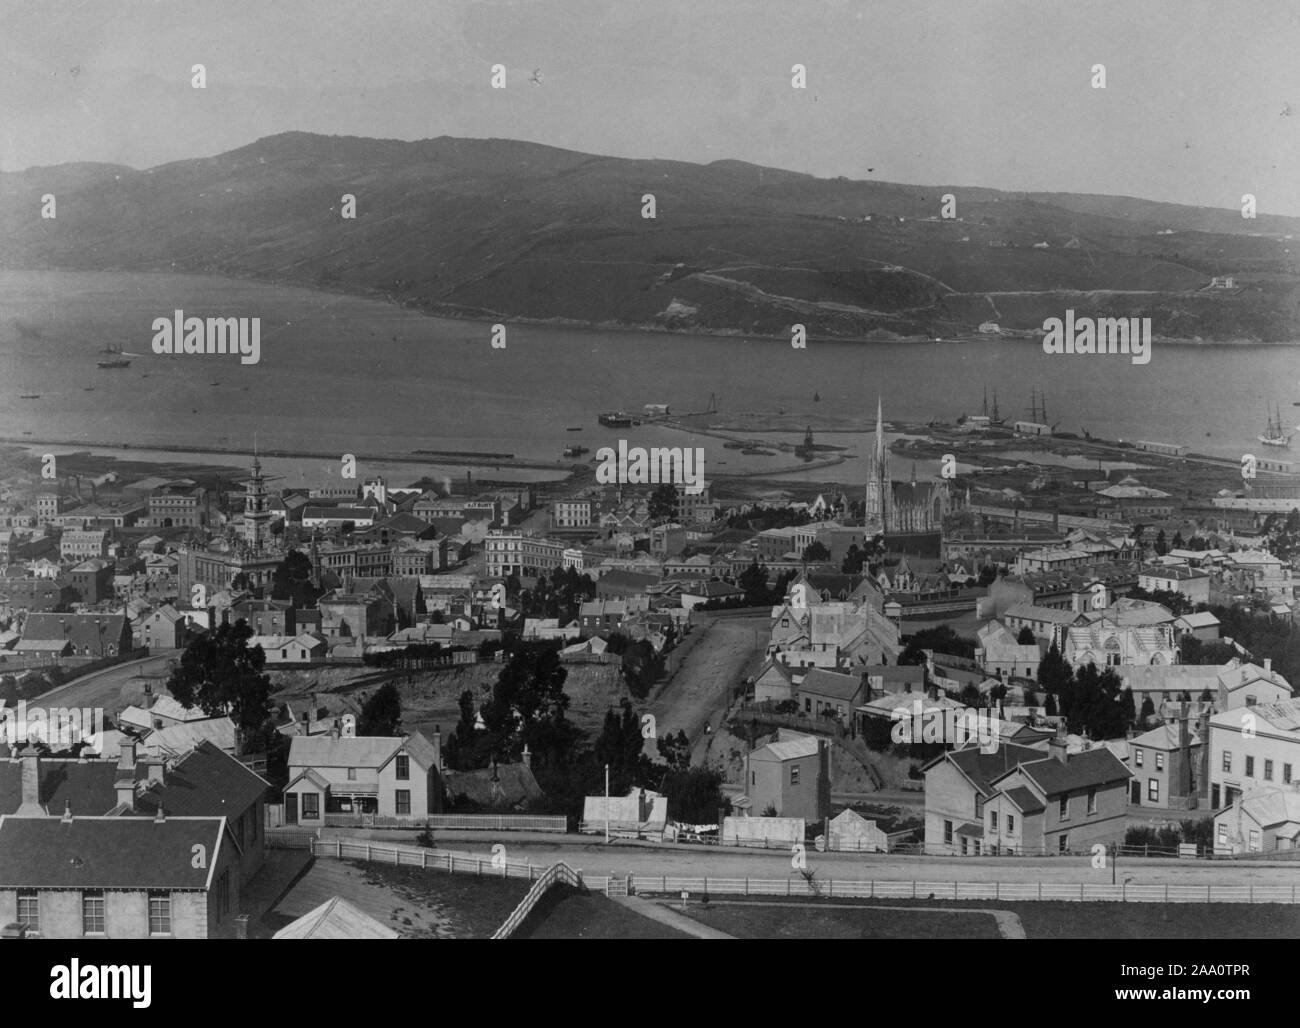 Black and white cityscape photograph of the city of Dunedin with Otago Harbour and a mountain range in the background, in the South Island, New Zealand, by photographer Frank Coxhead, 1885. From the New York Public Library. () Stock Photo